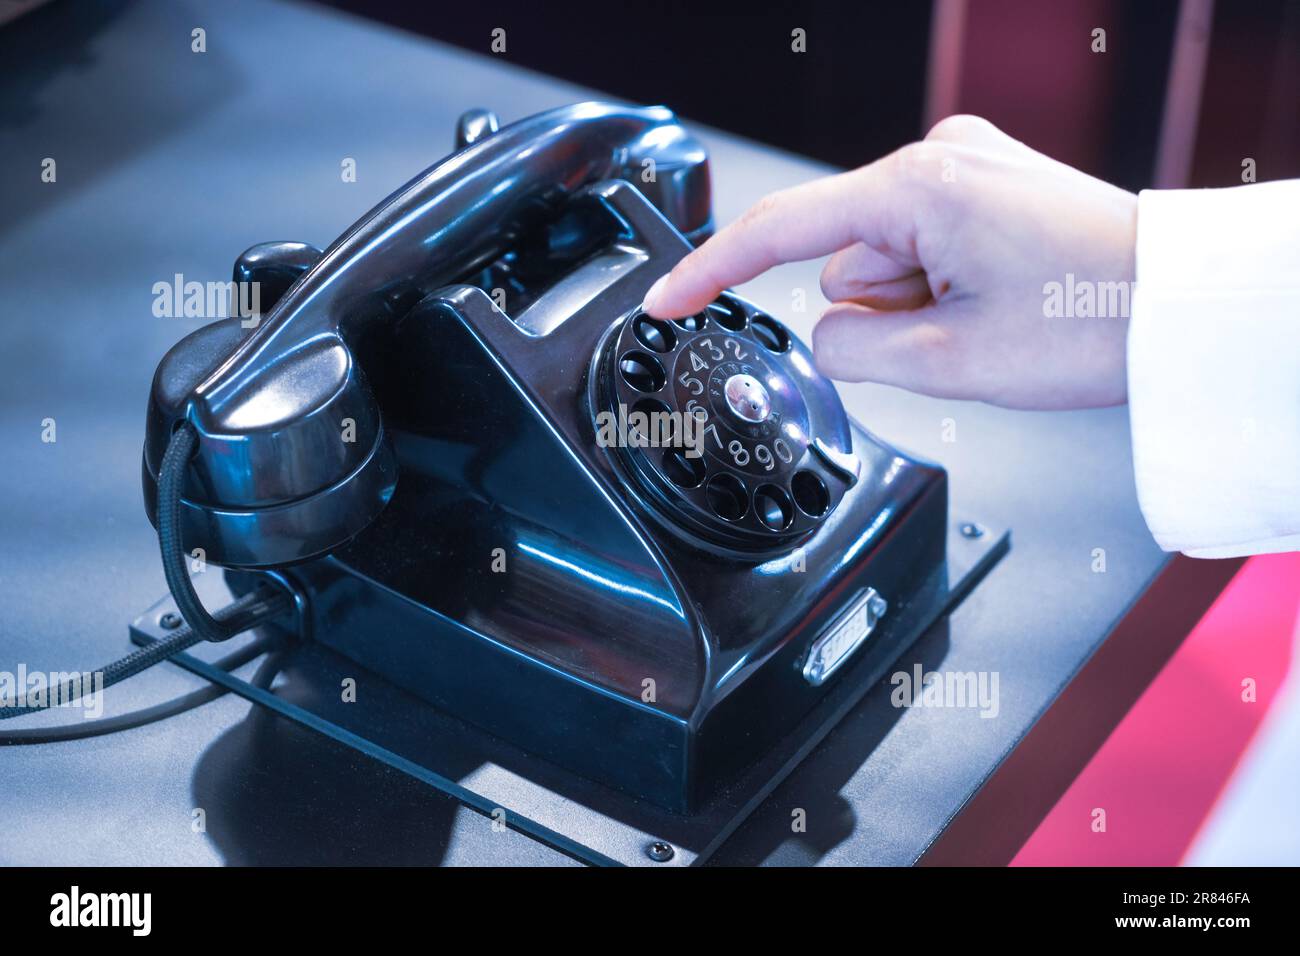 An old bakelite dial telephone with a finger dial Stock Photo